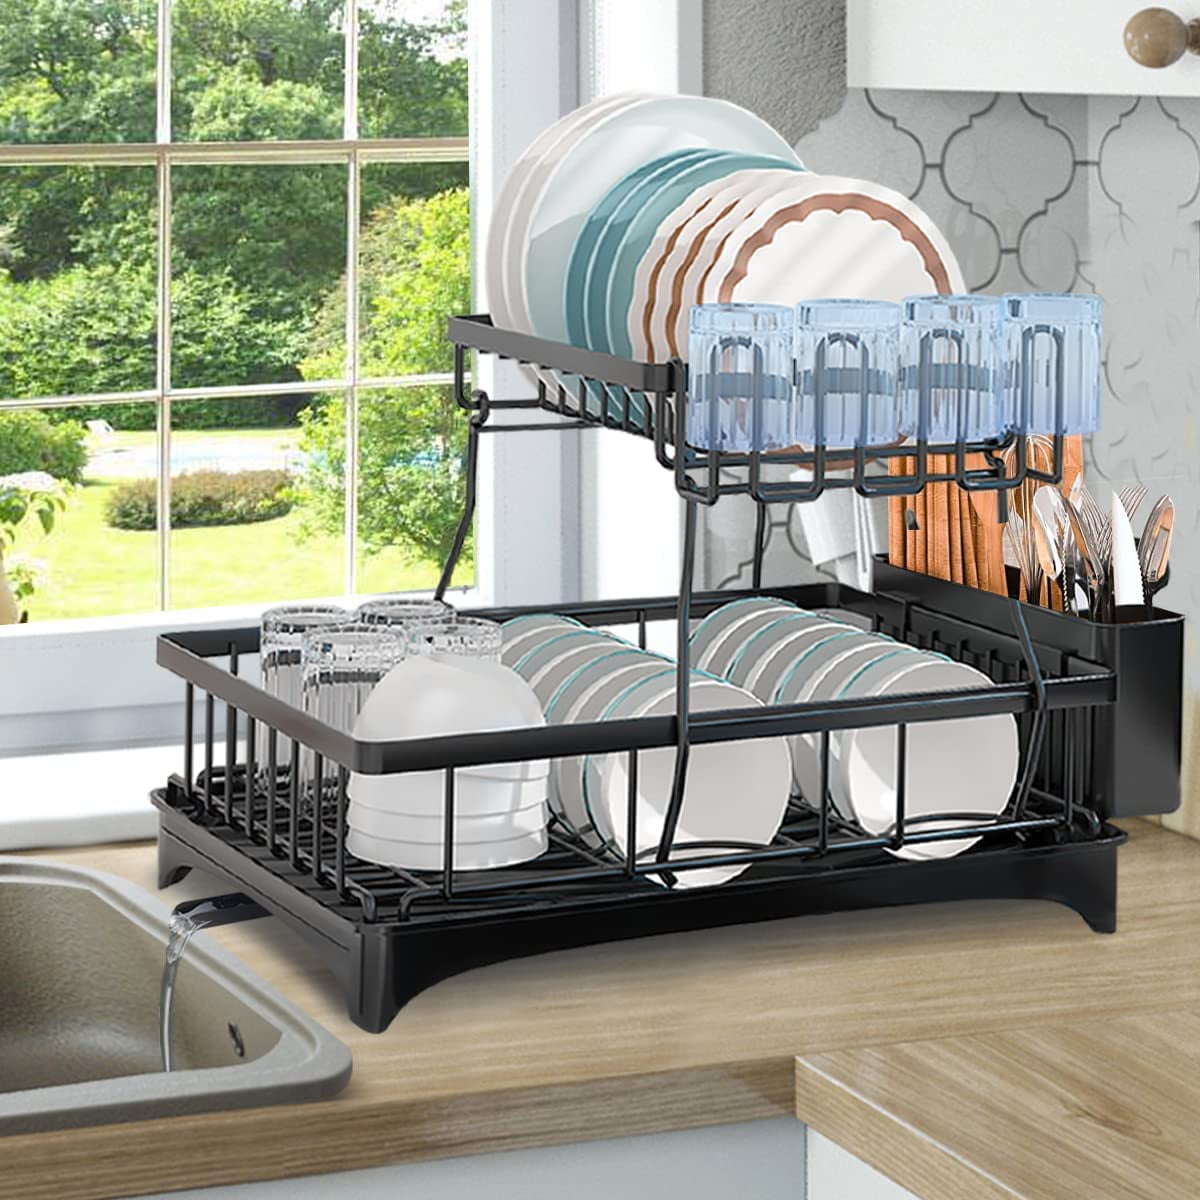 VAVSEA Dish Drying Rack for Kitchen Counter, 2 Tier Dish Rack, Rust-Proof Dish  Drainer with Cutting Board & Utensil Holder, Stainless Steel, Black Gold 